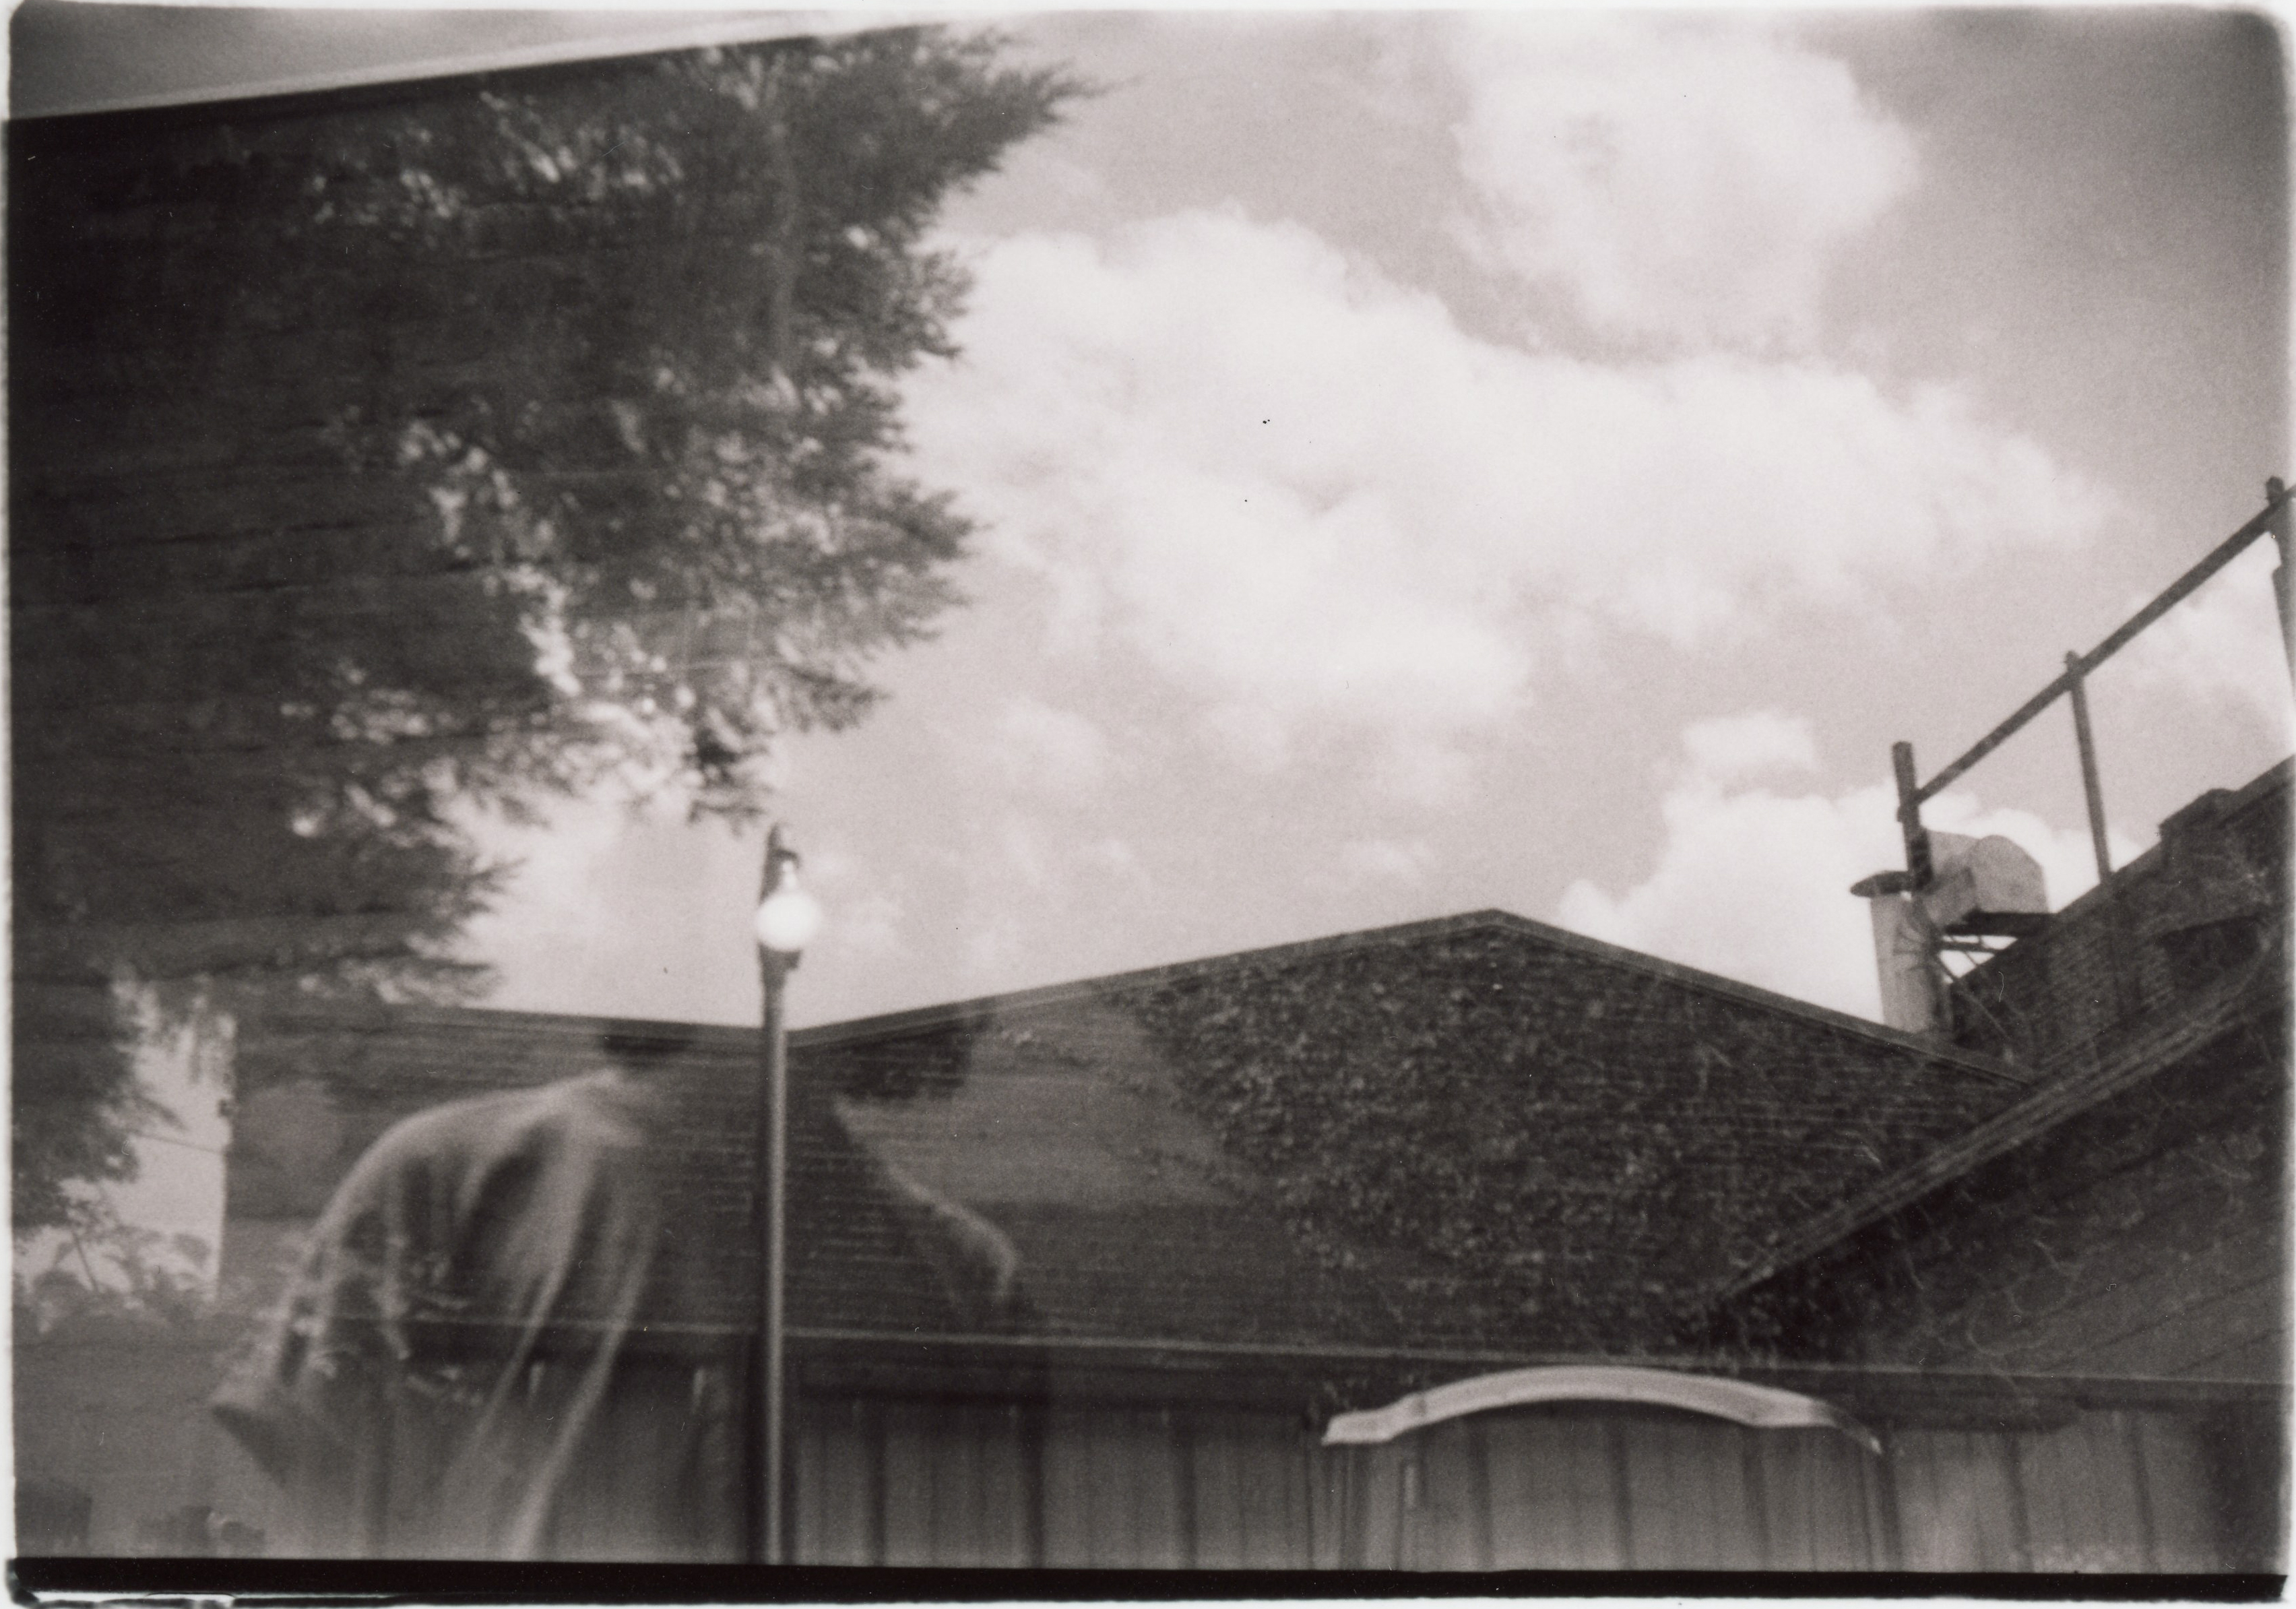 a black and white, sepia toned, 35mm print with messy edges; the image is a double exposure; one image shows a lamp pole, the lamp is on during a partially cloudy day; the lamp pole stands in front of a strip of corrugated metal at the bottom of the frame, which is in front of a shingled roofline; there is a tree in the top left corner, and on the right some ducts bars come out of the roof; in the second image a person is standing overlaid with the lamp pole; the light shines where their face would be, but the sky from the other image obscures the exposure of their head